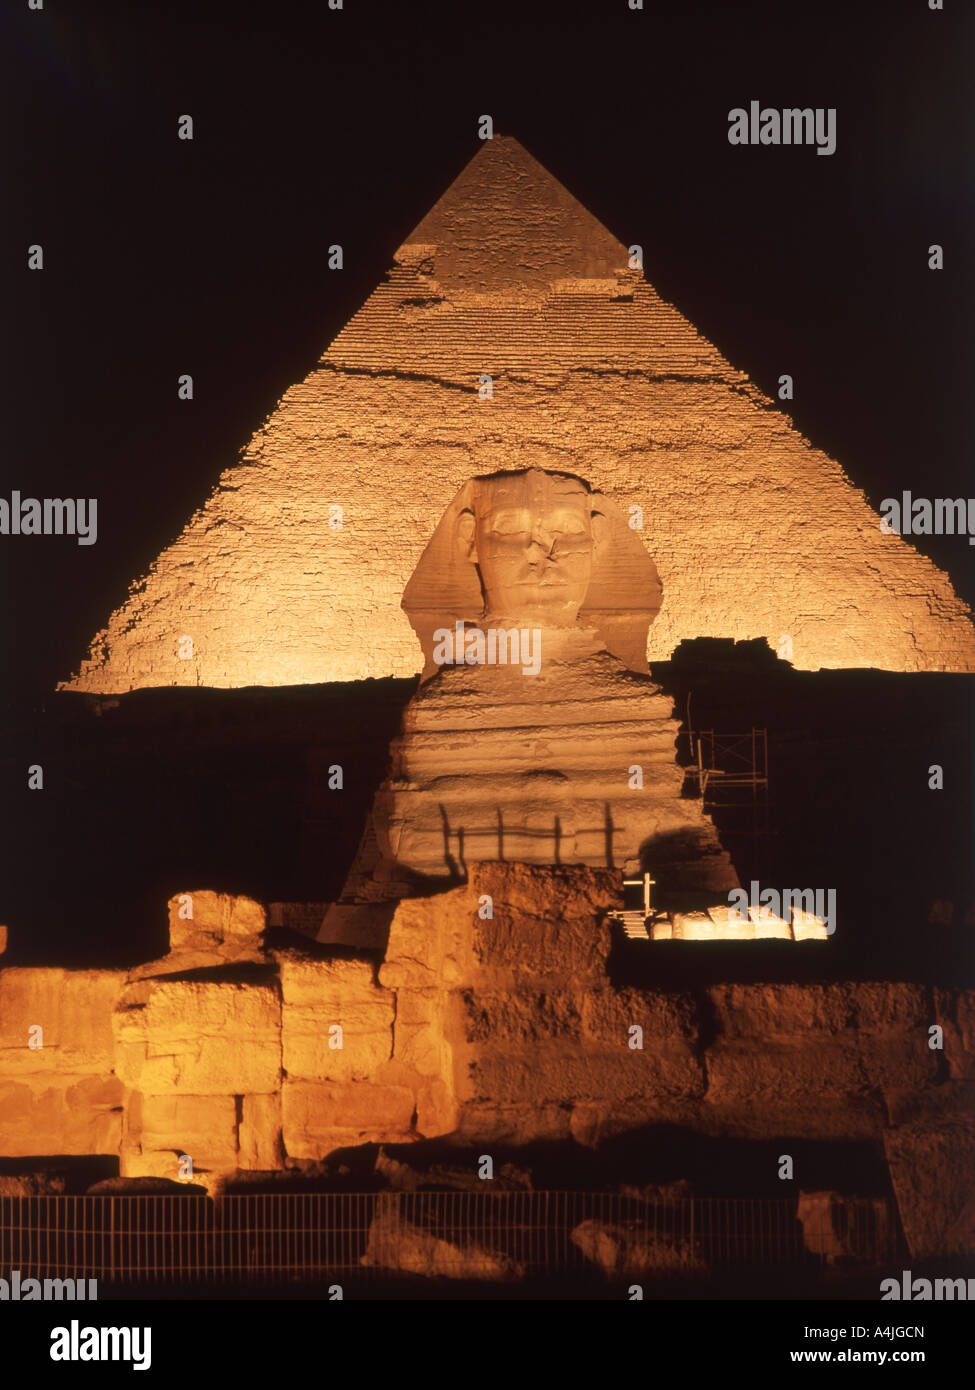 The ancient Pyramid of Khafre and The Great Sphinx of Giza at night, Giza, Giza Governate, Republic of Egypt Stock Photo